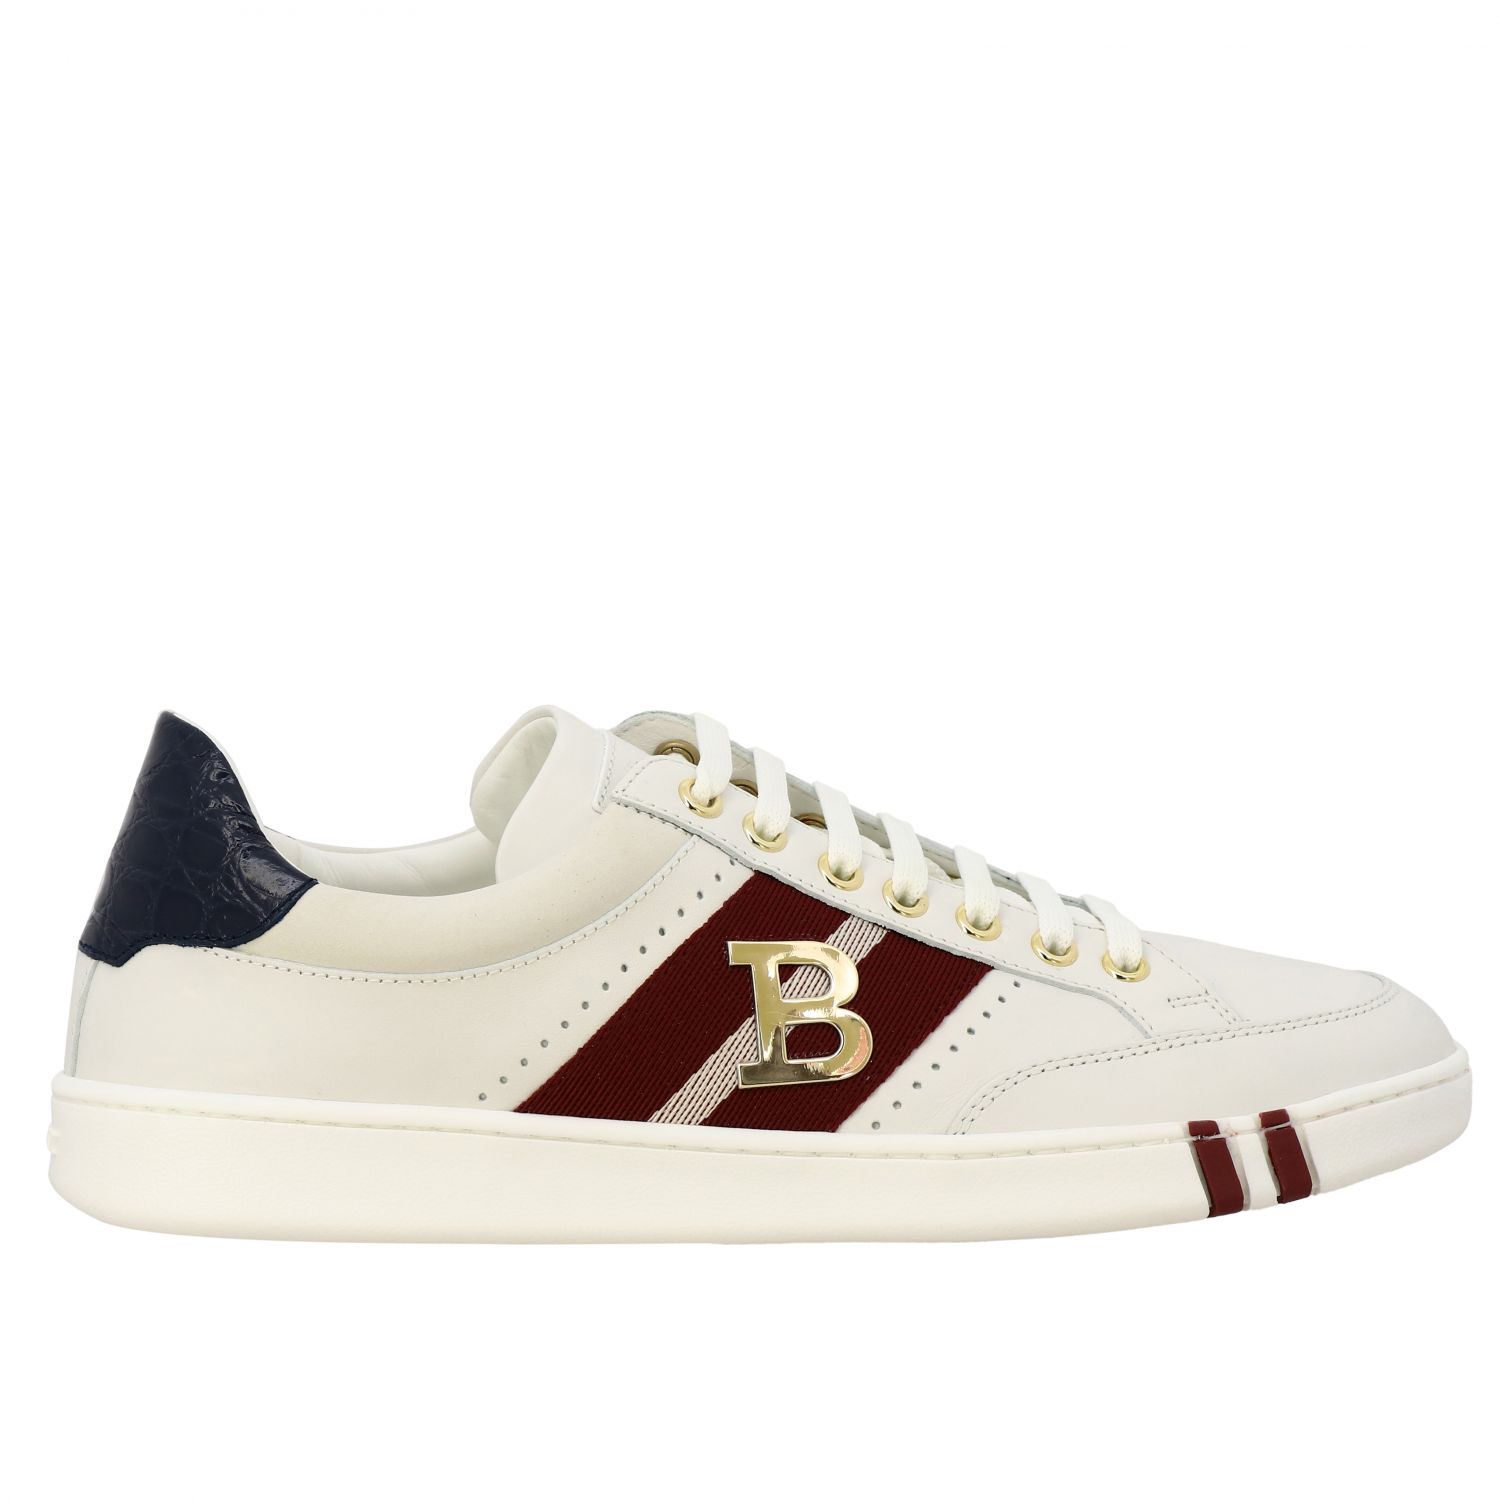 Wilsy Bally sneakers in suede leather 